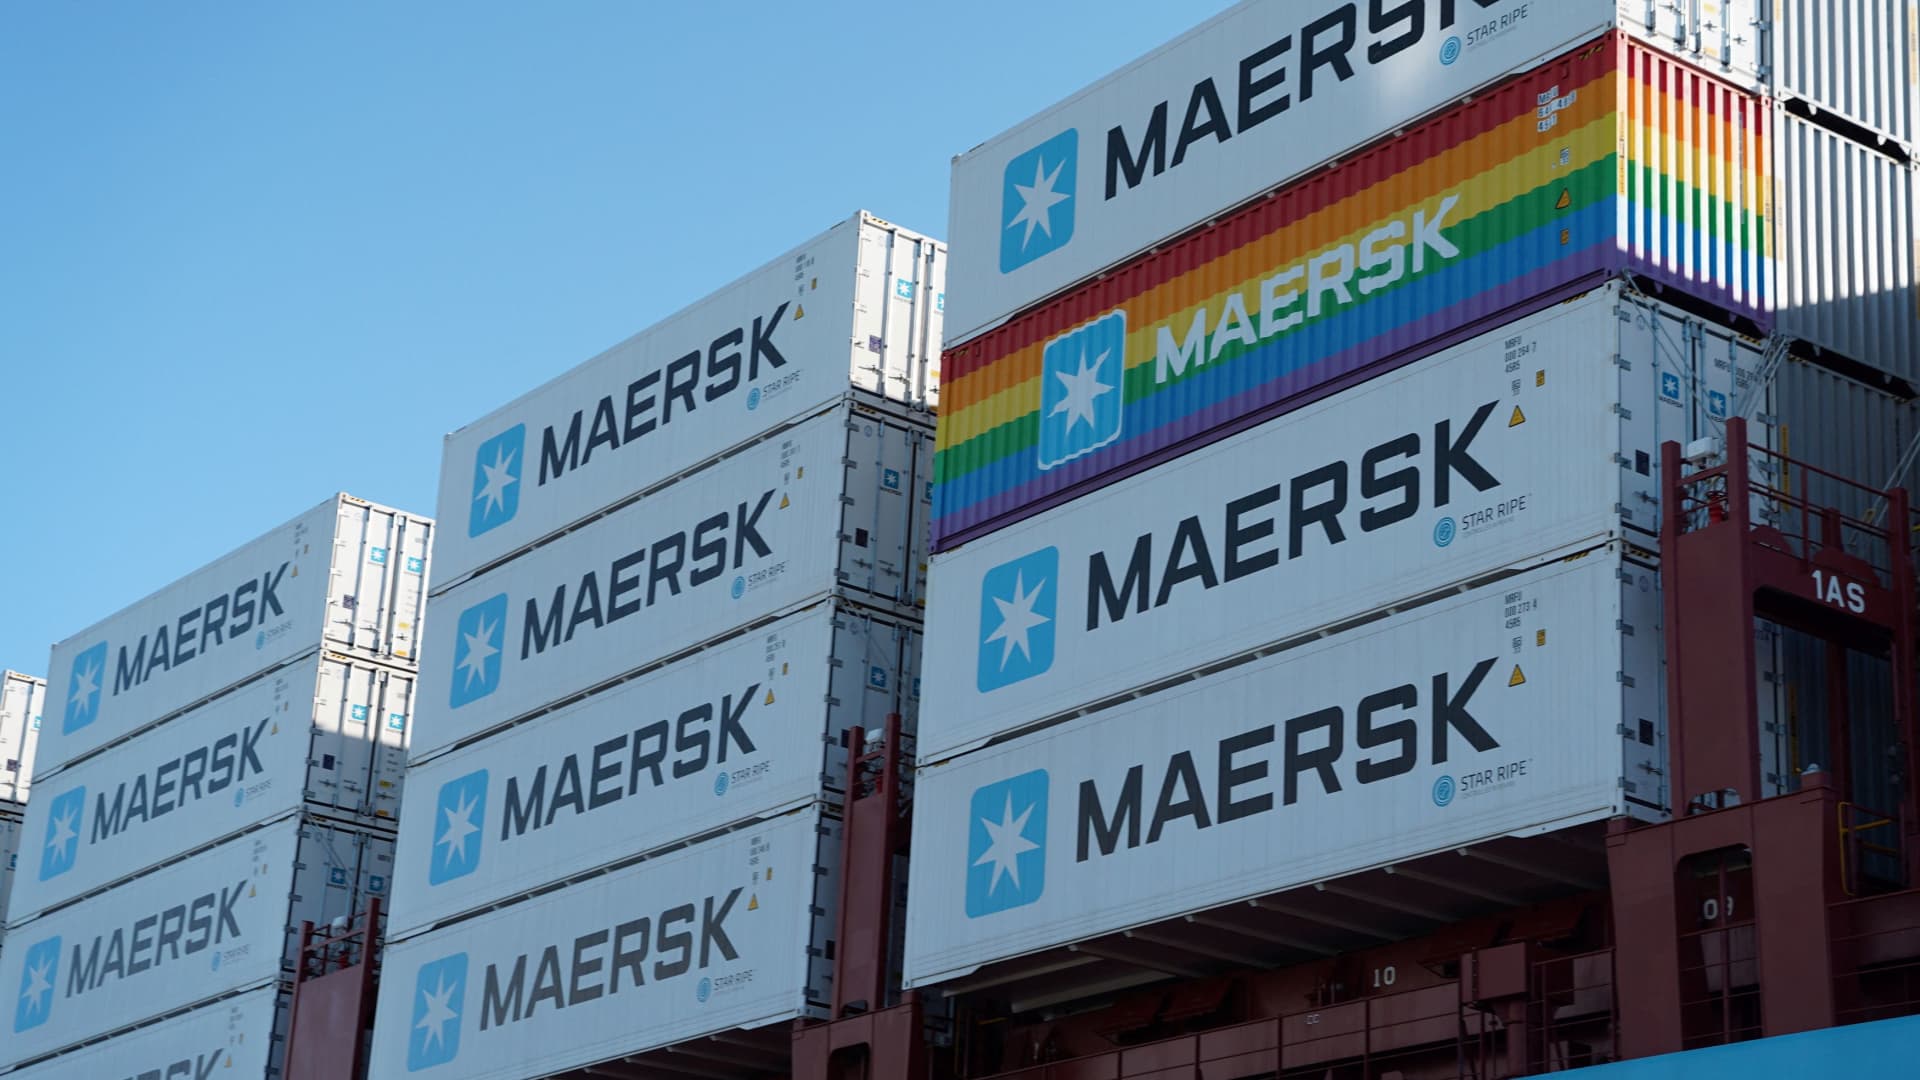 How Maersk grew its shipping empire and how it’s evolving